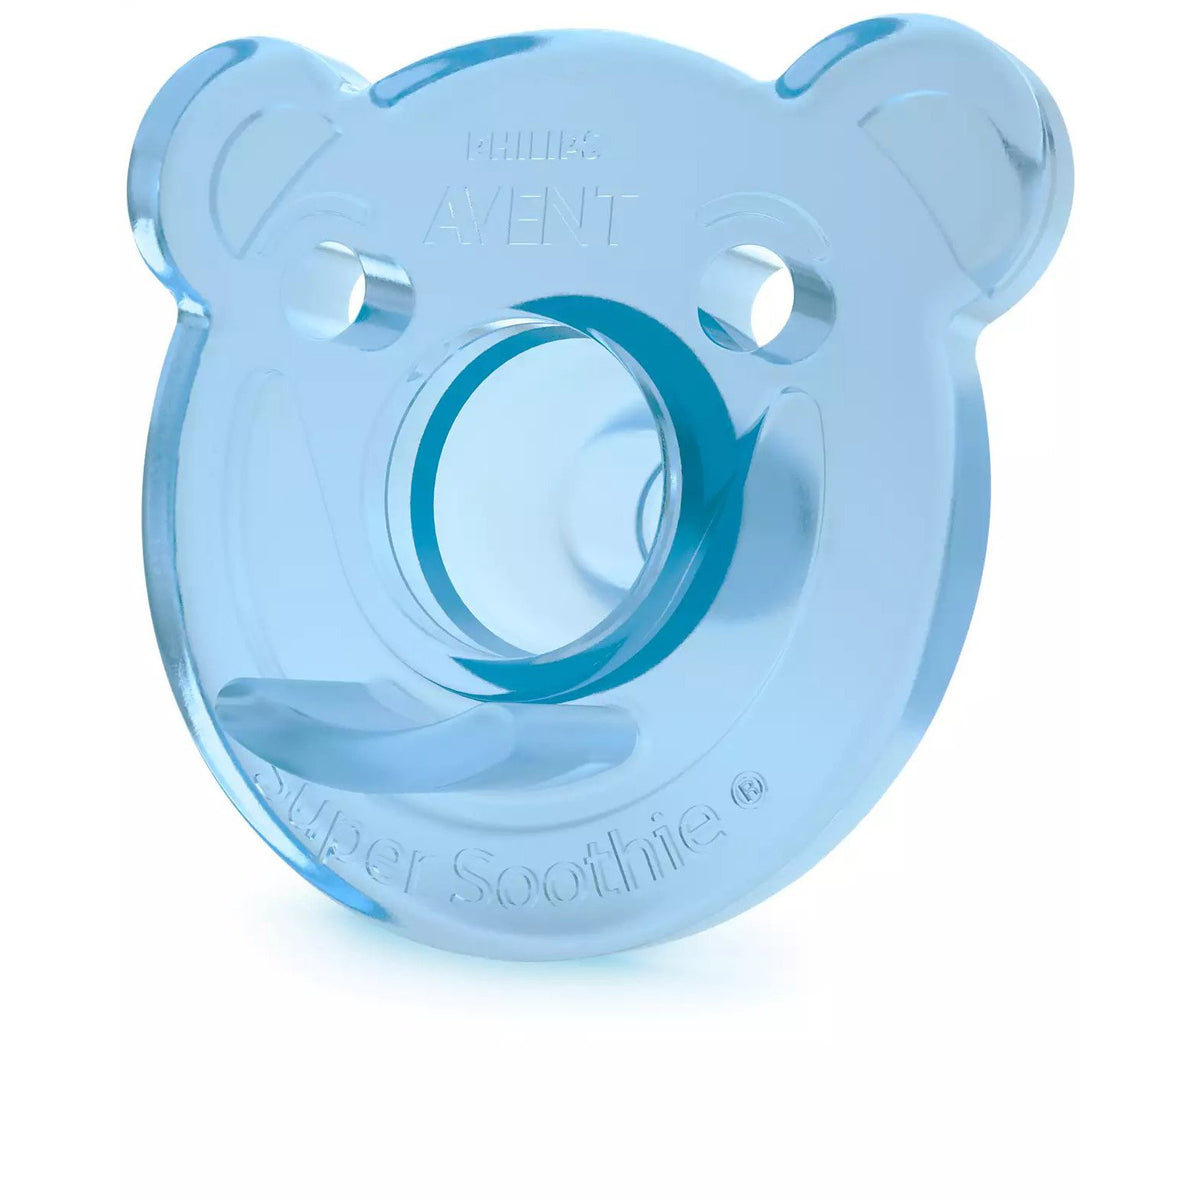 philips-avent-soothie-shapes-pacifier- (9)